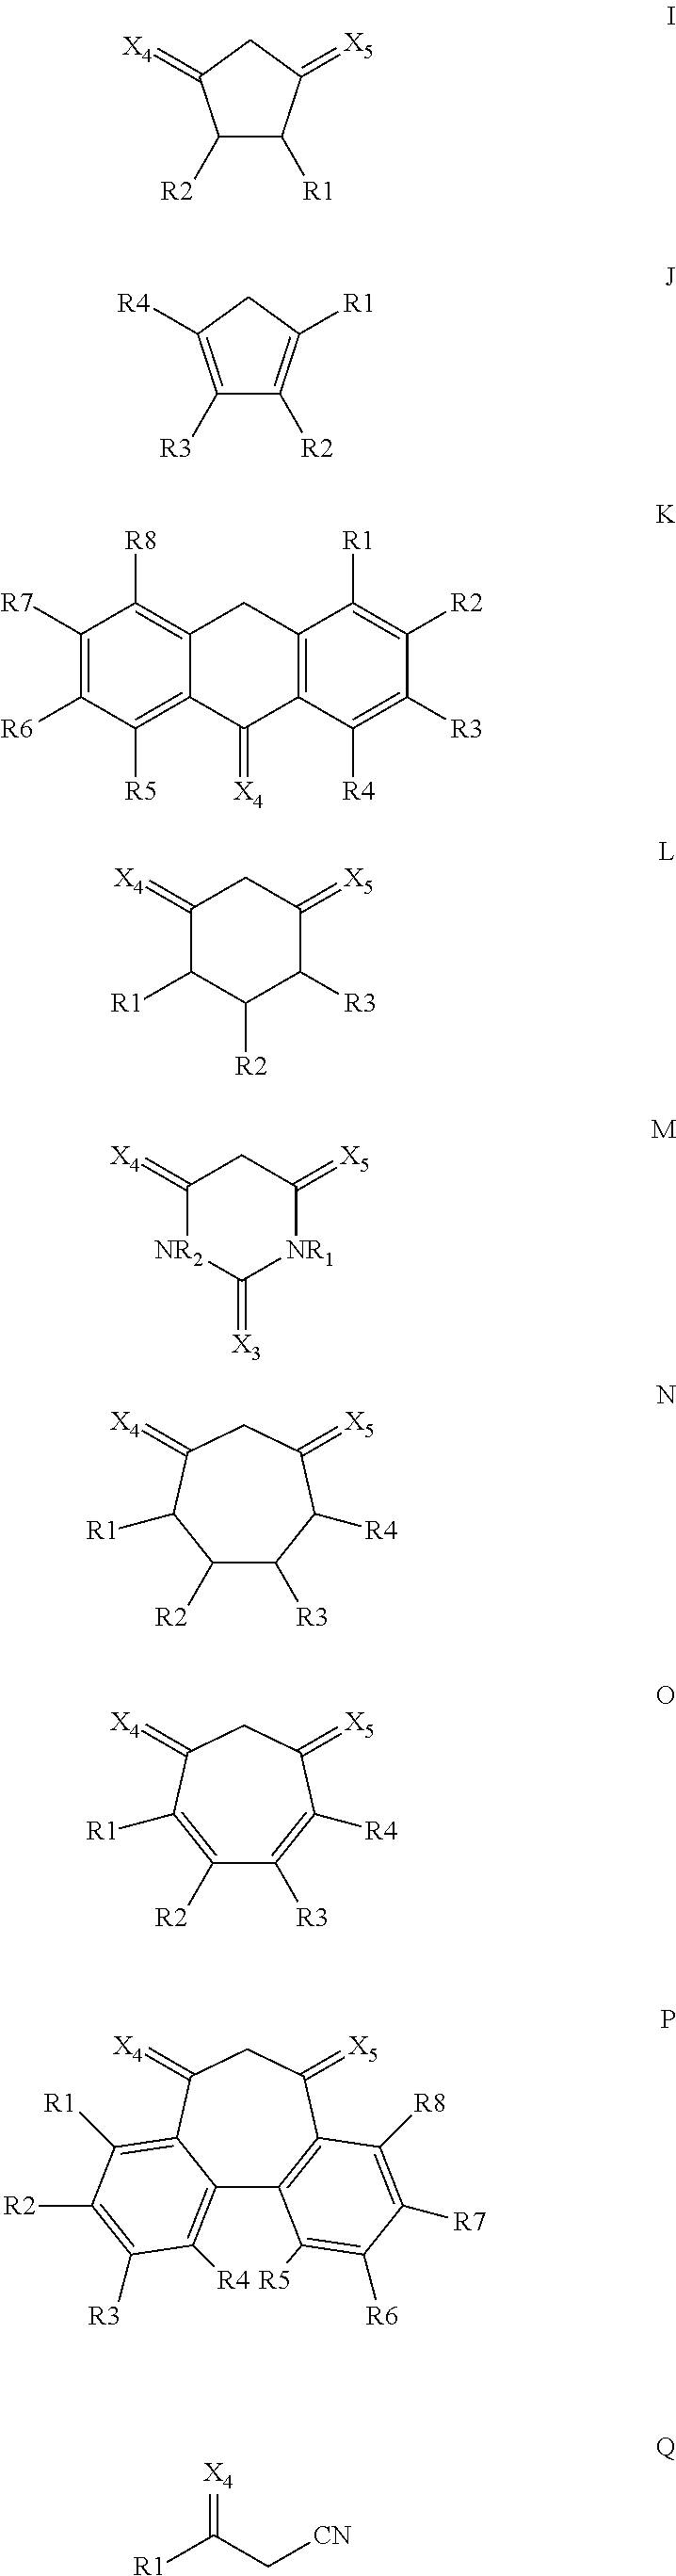 Oxocarbon-, pseudooxocarbon- and radialene compounds and their use